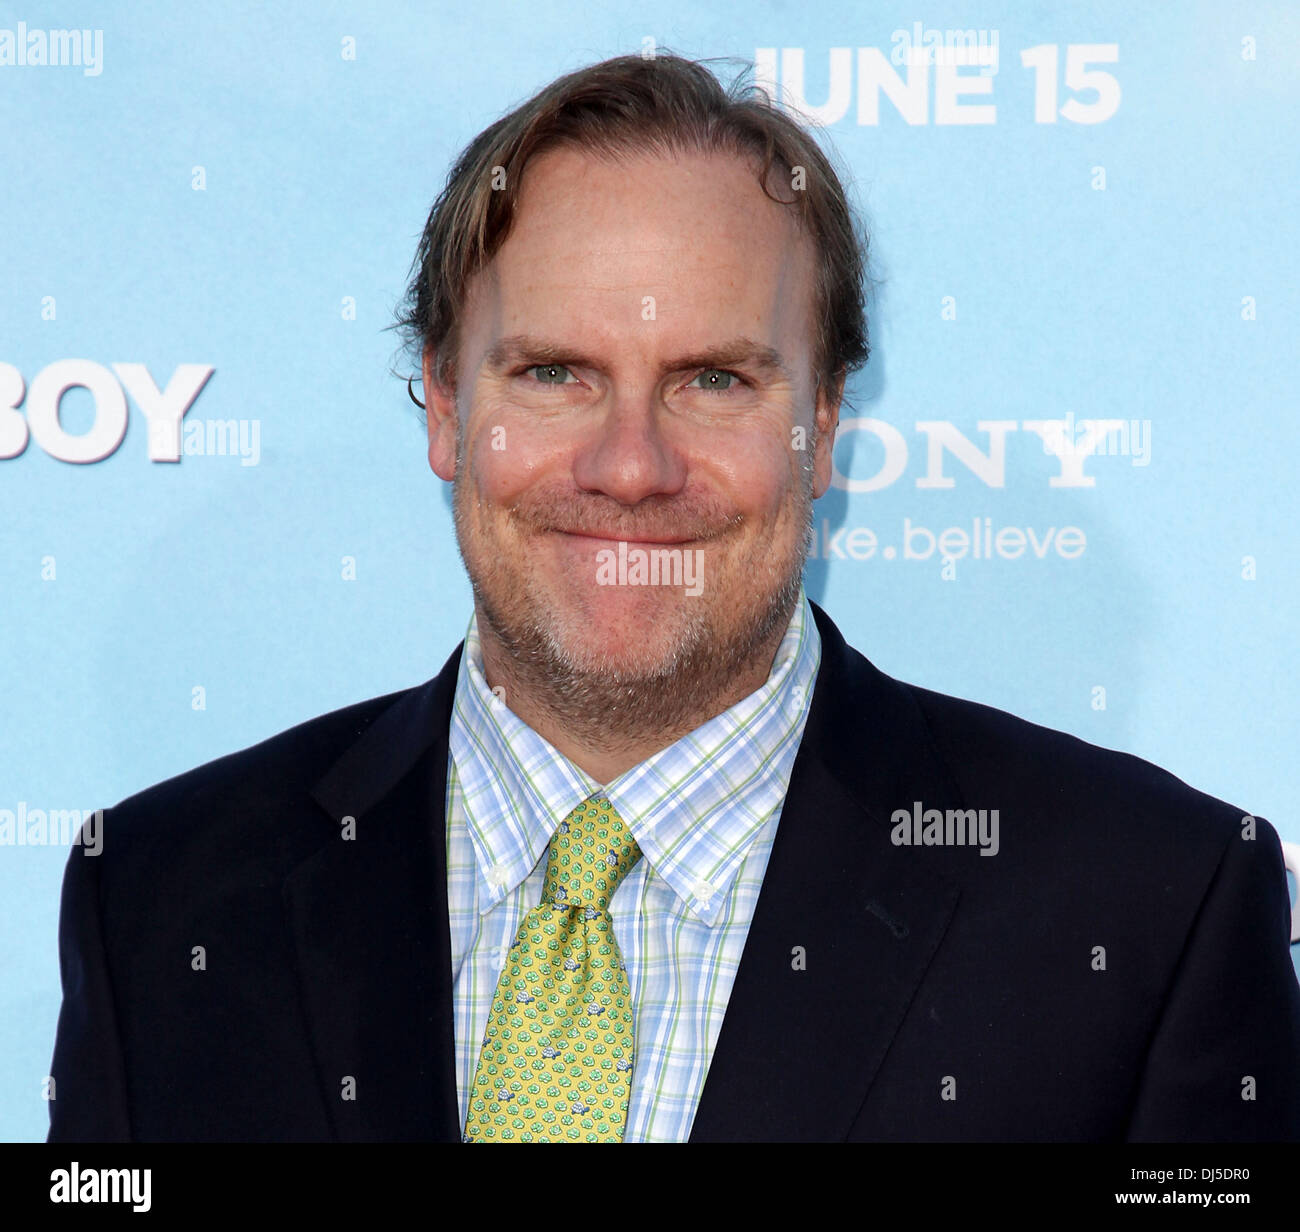 Kevin P. Farley Premiere Of Columbia Pictures' "That's My Boy" at Regency Village Theatre Westwood, California - 04.06.12 Stock Photo